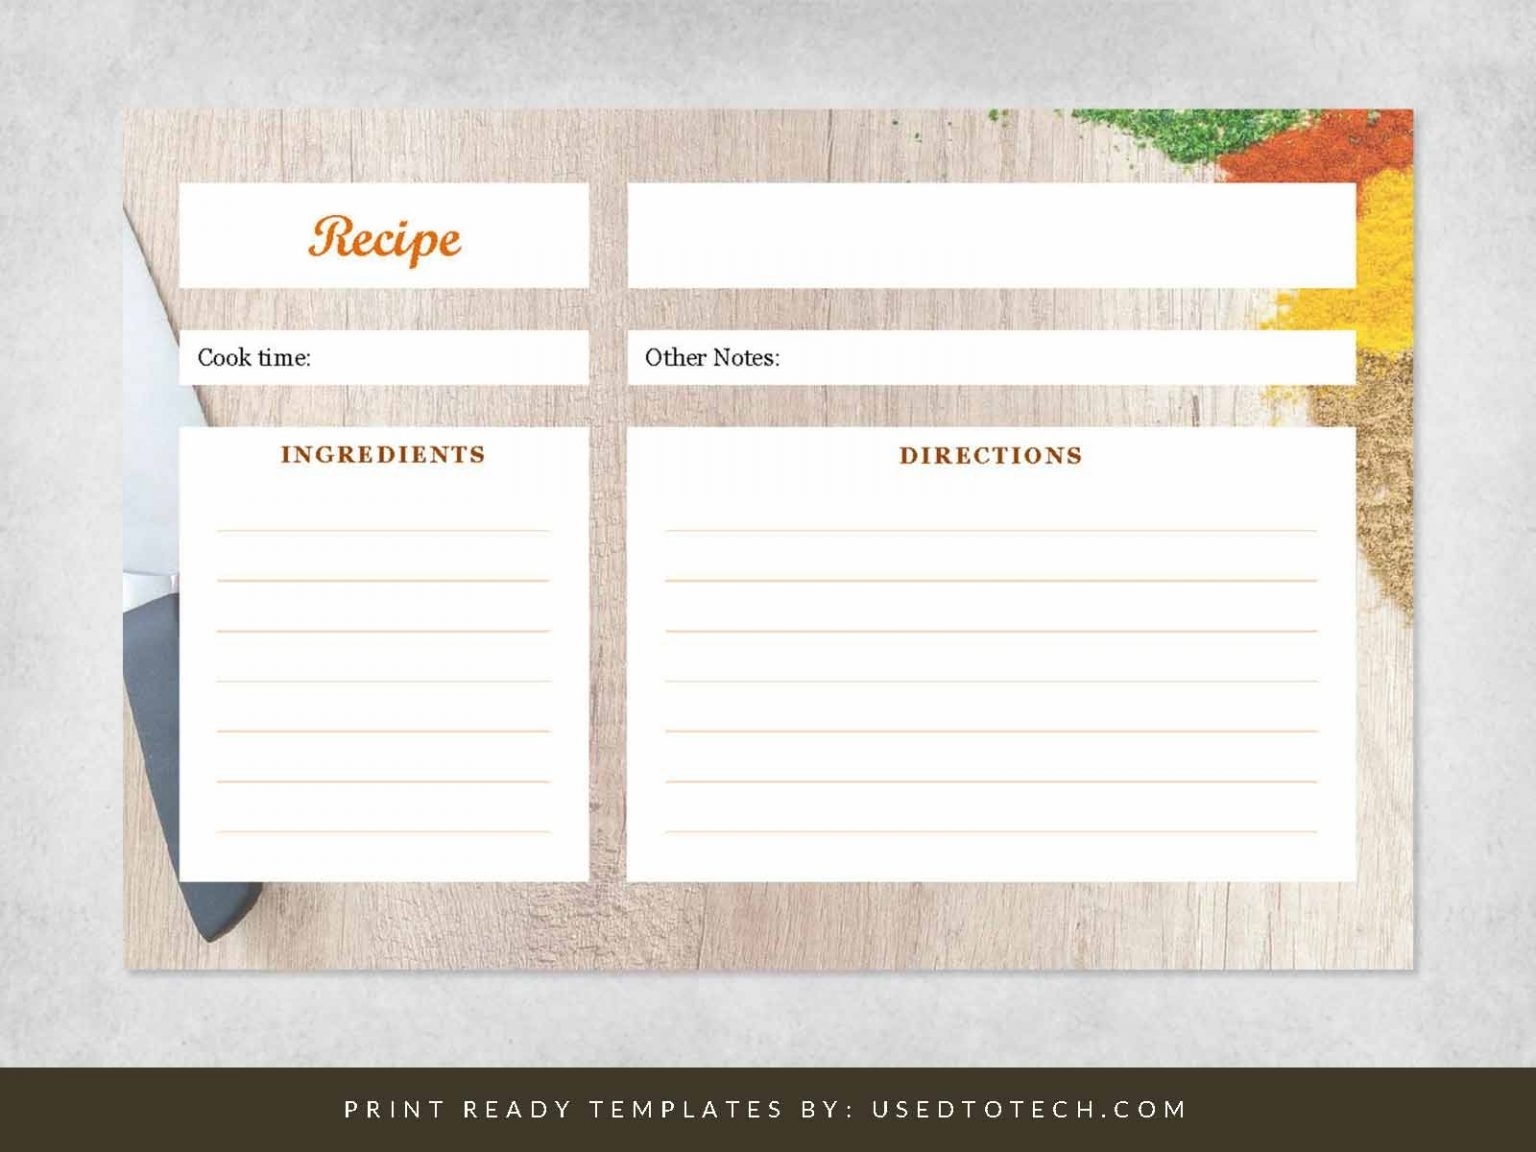 Fancy 4 X 6 Recipe Card Template For Word - Used To Tech throughout Microsoft Word Recipe Card Template